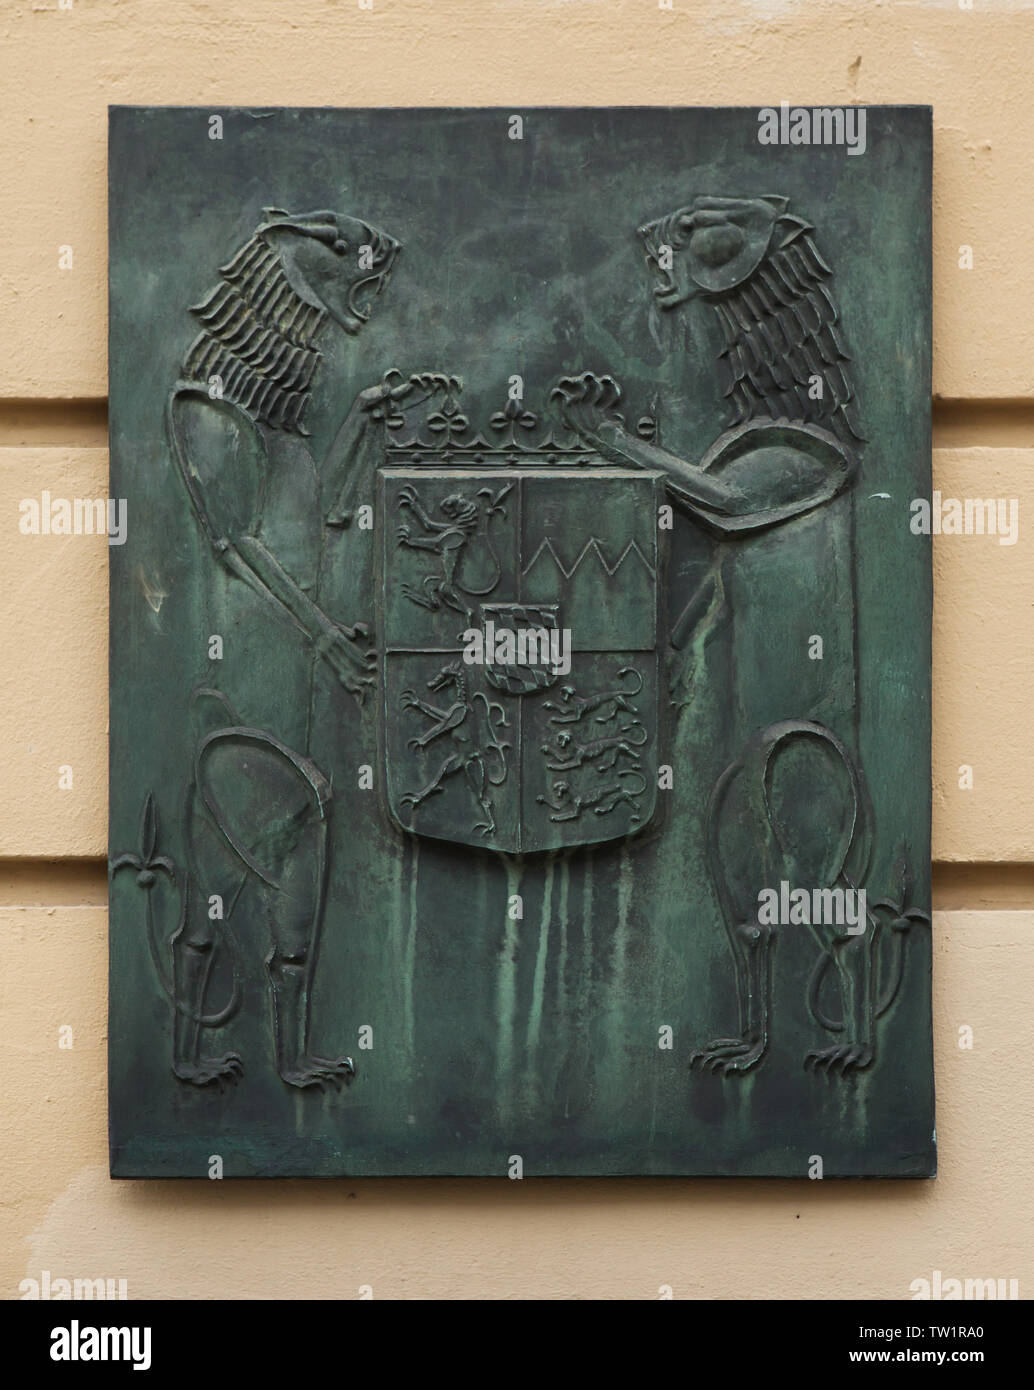 Coat of arms of Bavaria depicted on the bronze plaque in Munich, Bavaria, Germany. Stock Photo